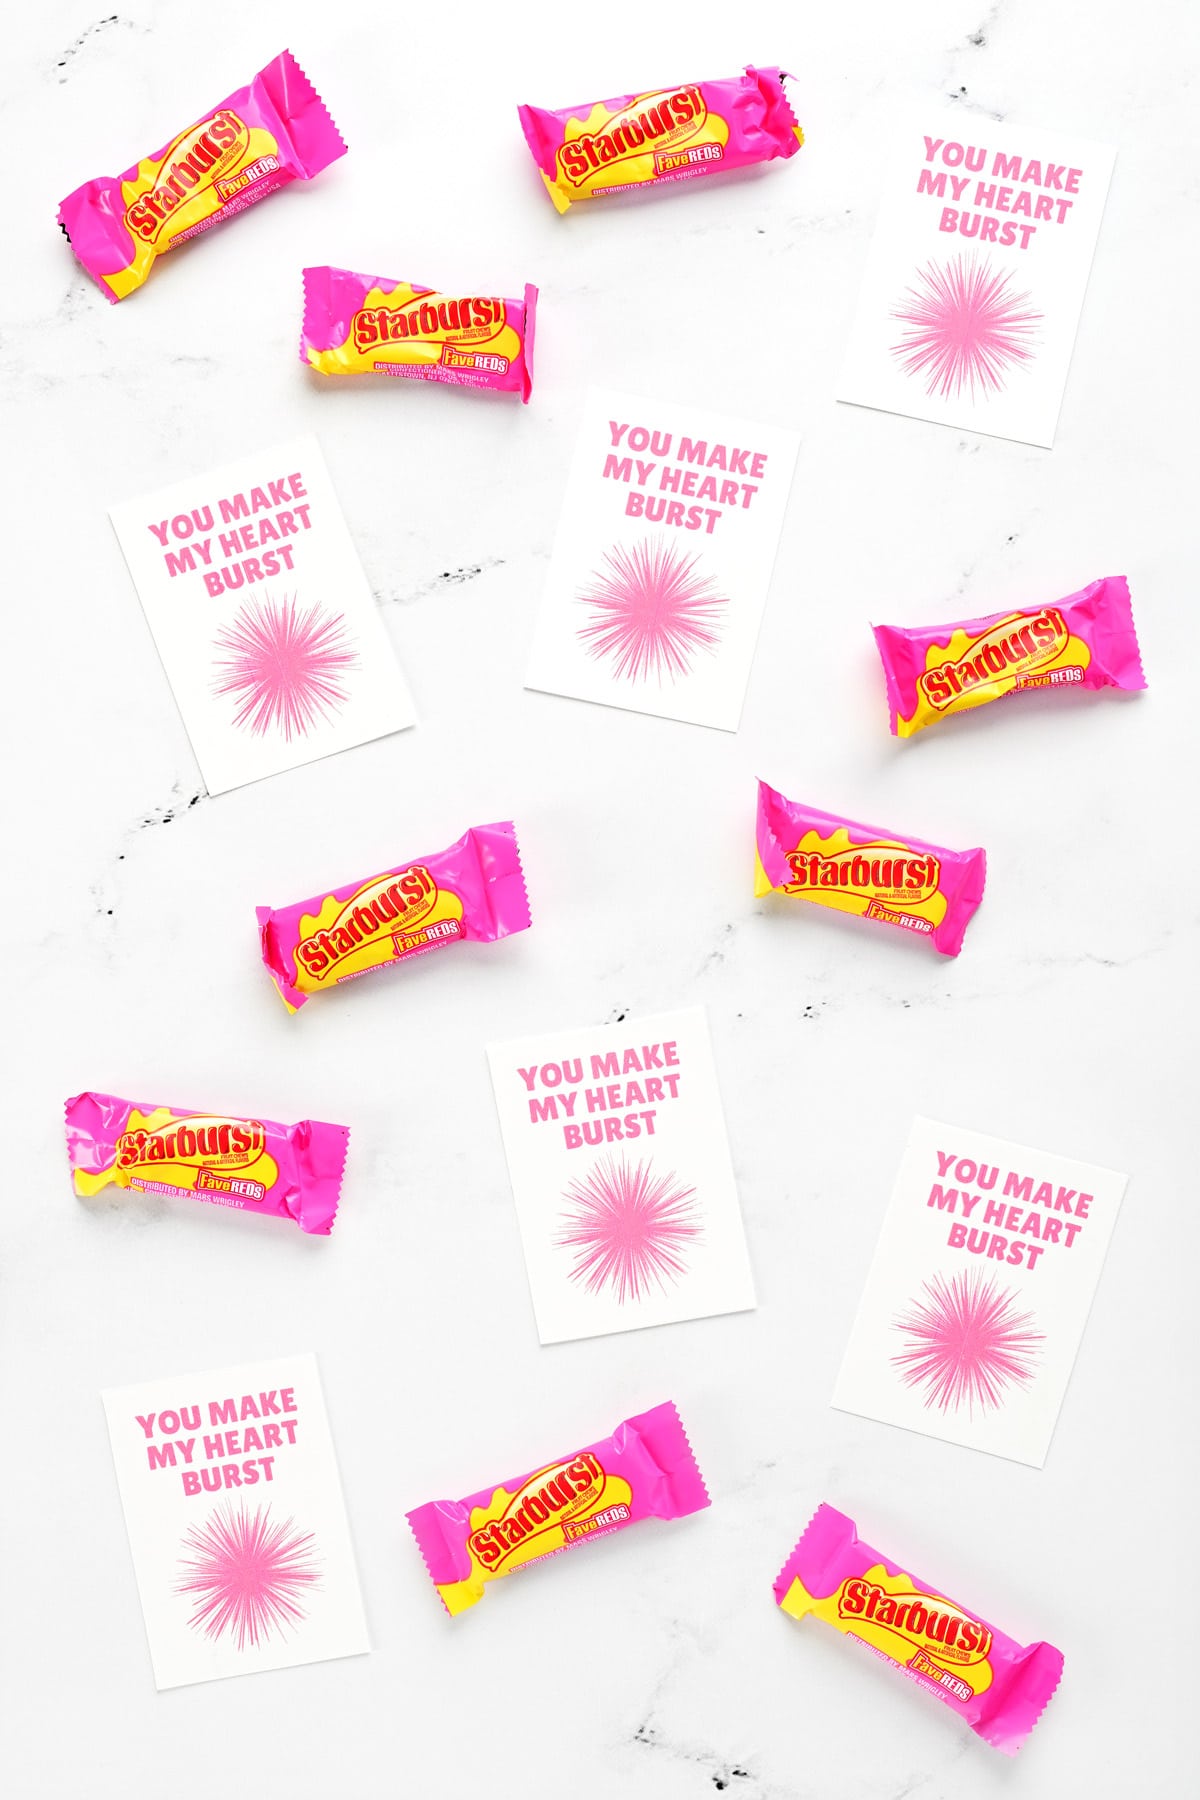 Valentines printables and starburst candies on the surface of a countertop.